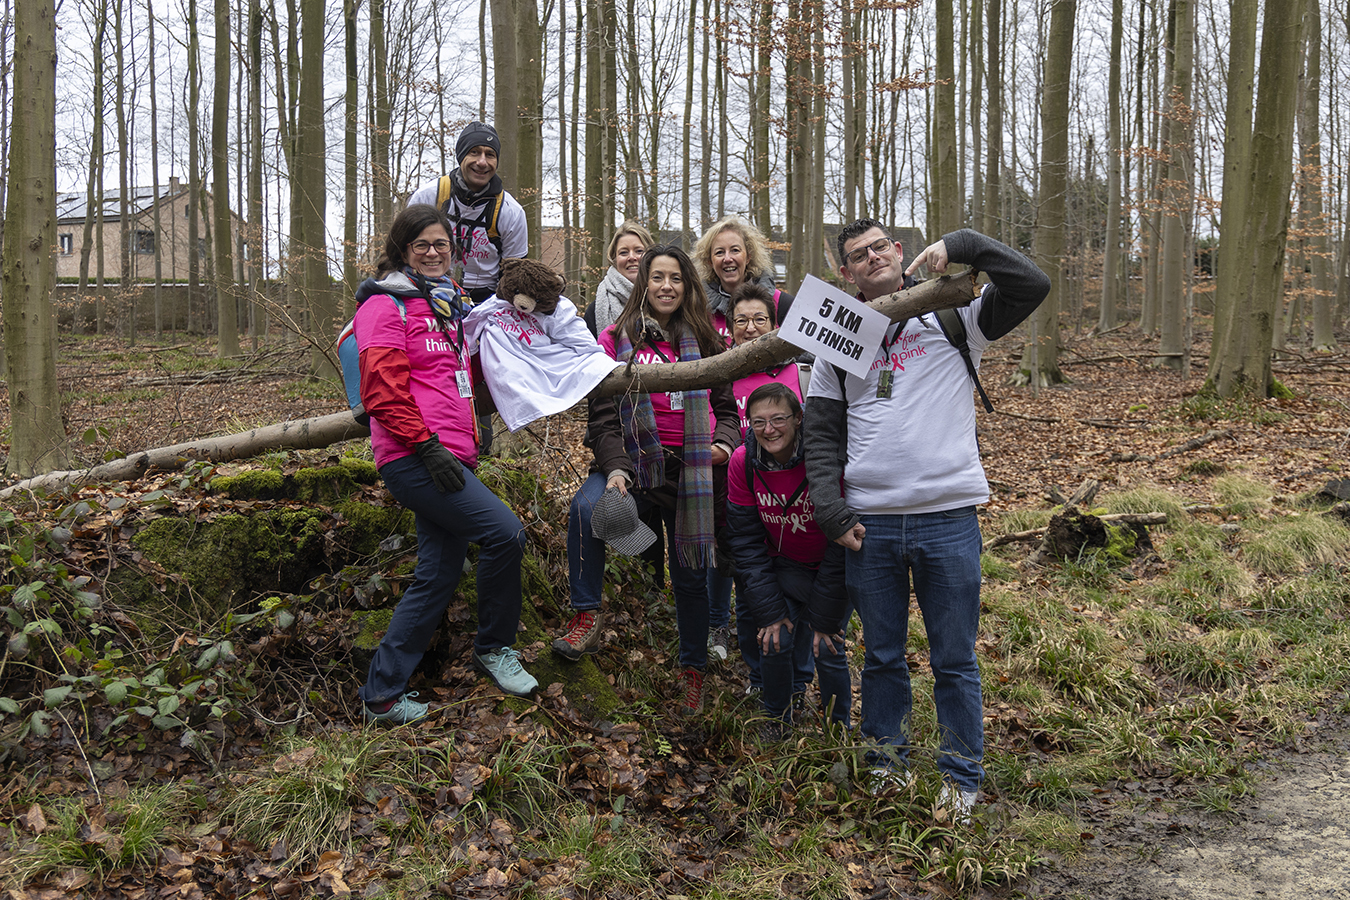 <p>Some of our colleagues participated in the Think Pink walk in Tervuren to support breast cancer research. As a company, we believe in the importance of these initiatives and are committed to doing our part in the fight against breast cancer.</p>